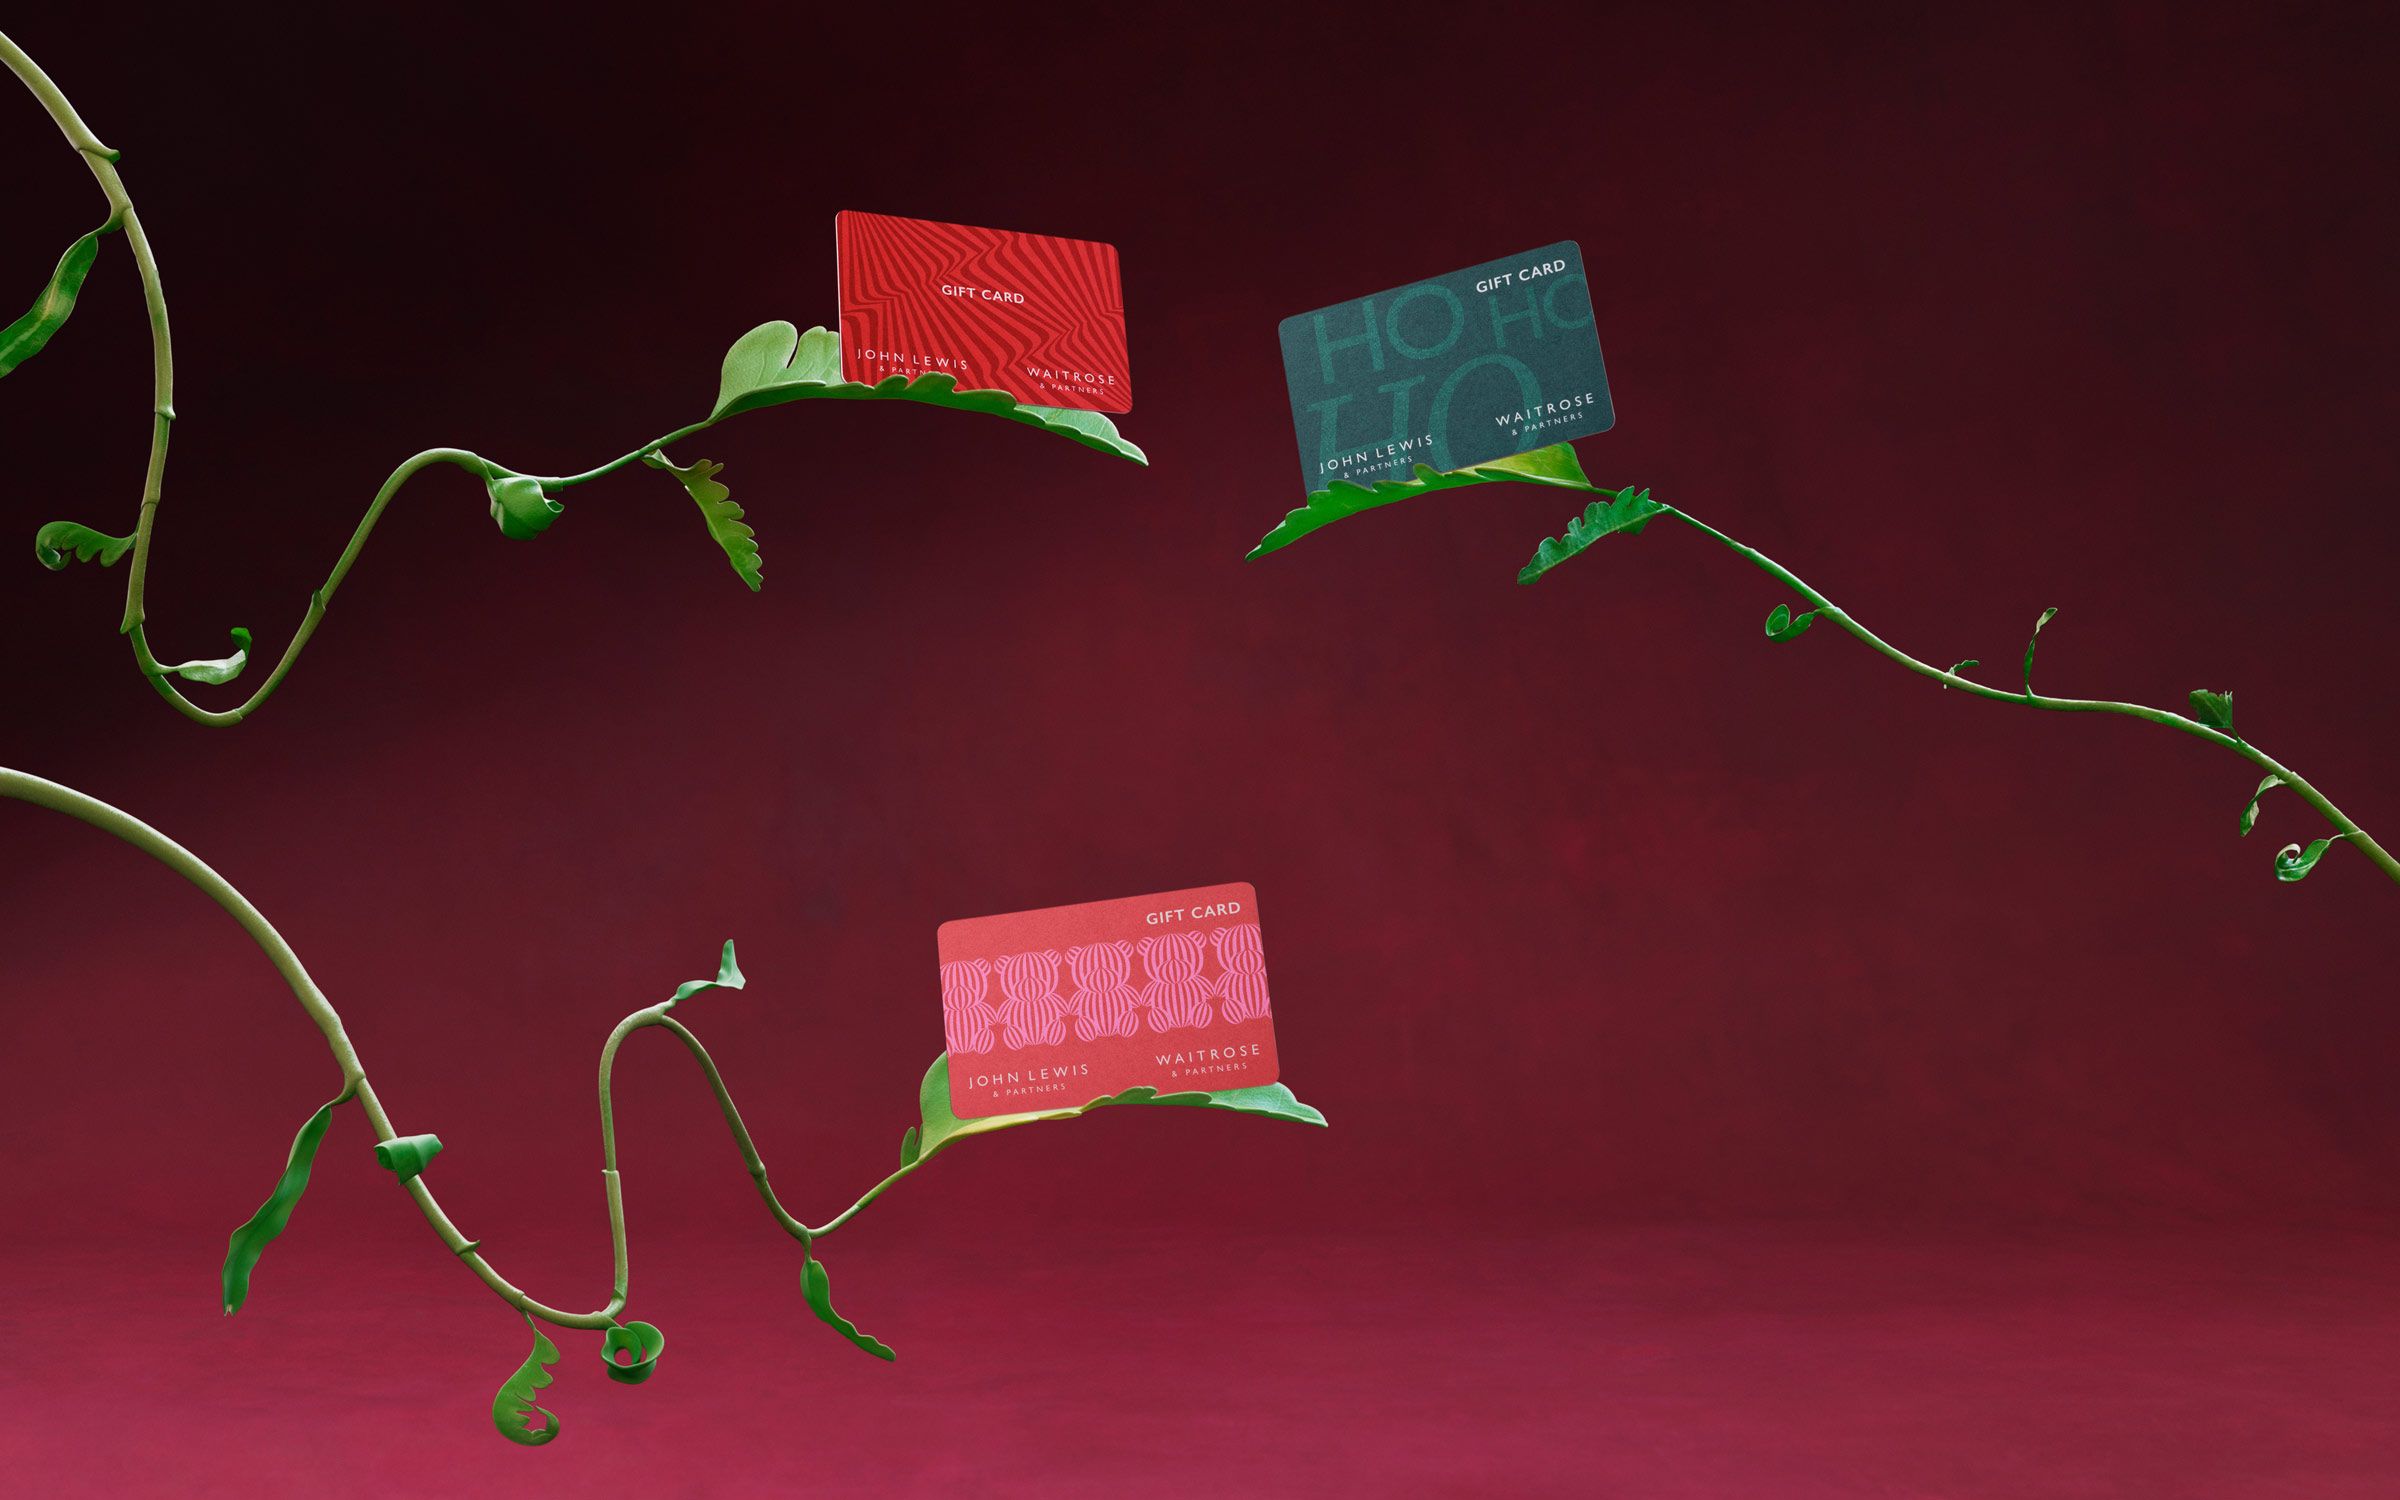 Image of gift cards hanging off a vine